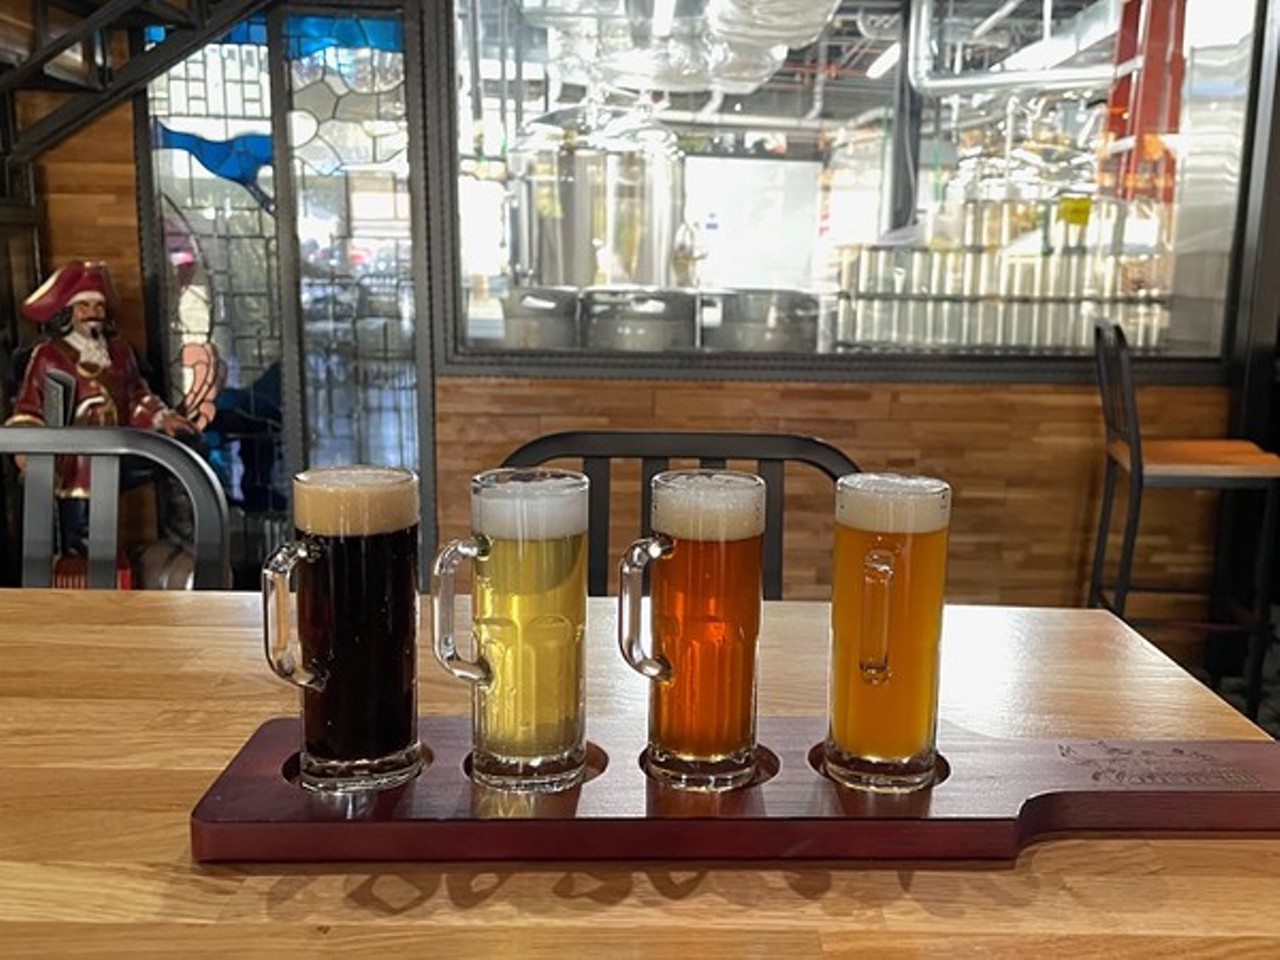 Schnitz Ale Brewery
5729 Pearl Rd.
“Love Das Schnitzel house. I would also recommend their brewery across the street, Schnitz Ale Brewery, it's great.” Read Doug Trattner’s review here.
Via Puffyshirt216/Reddit